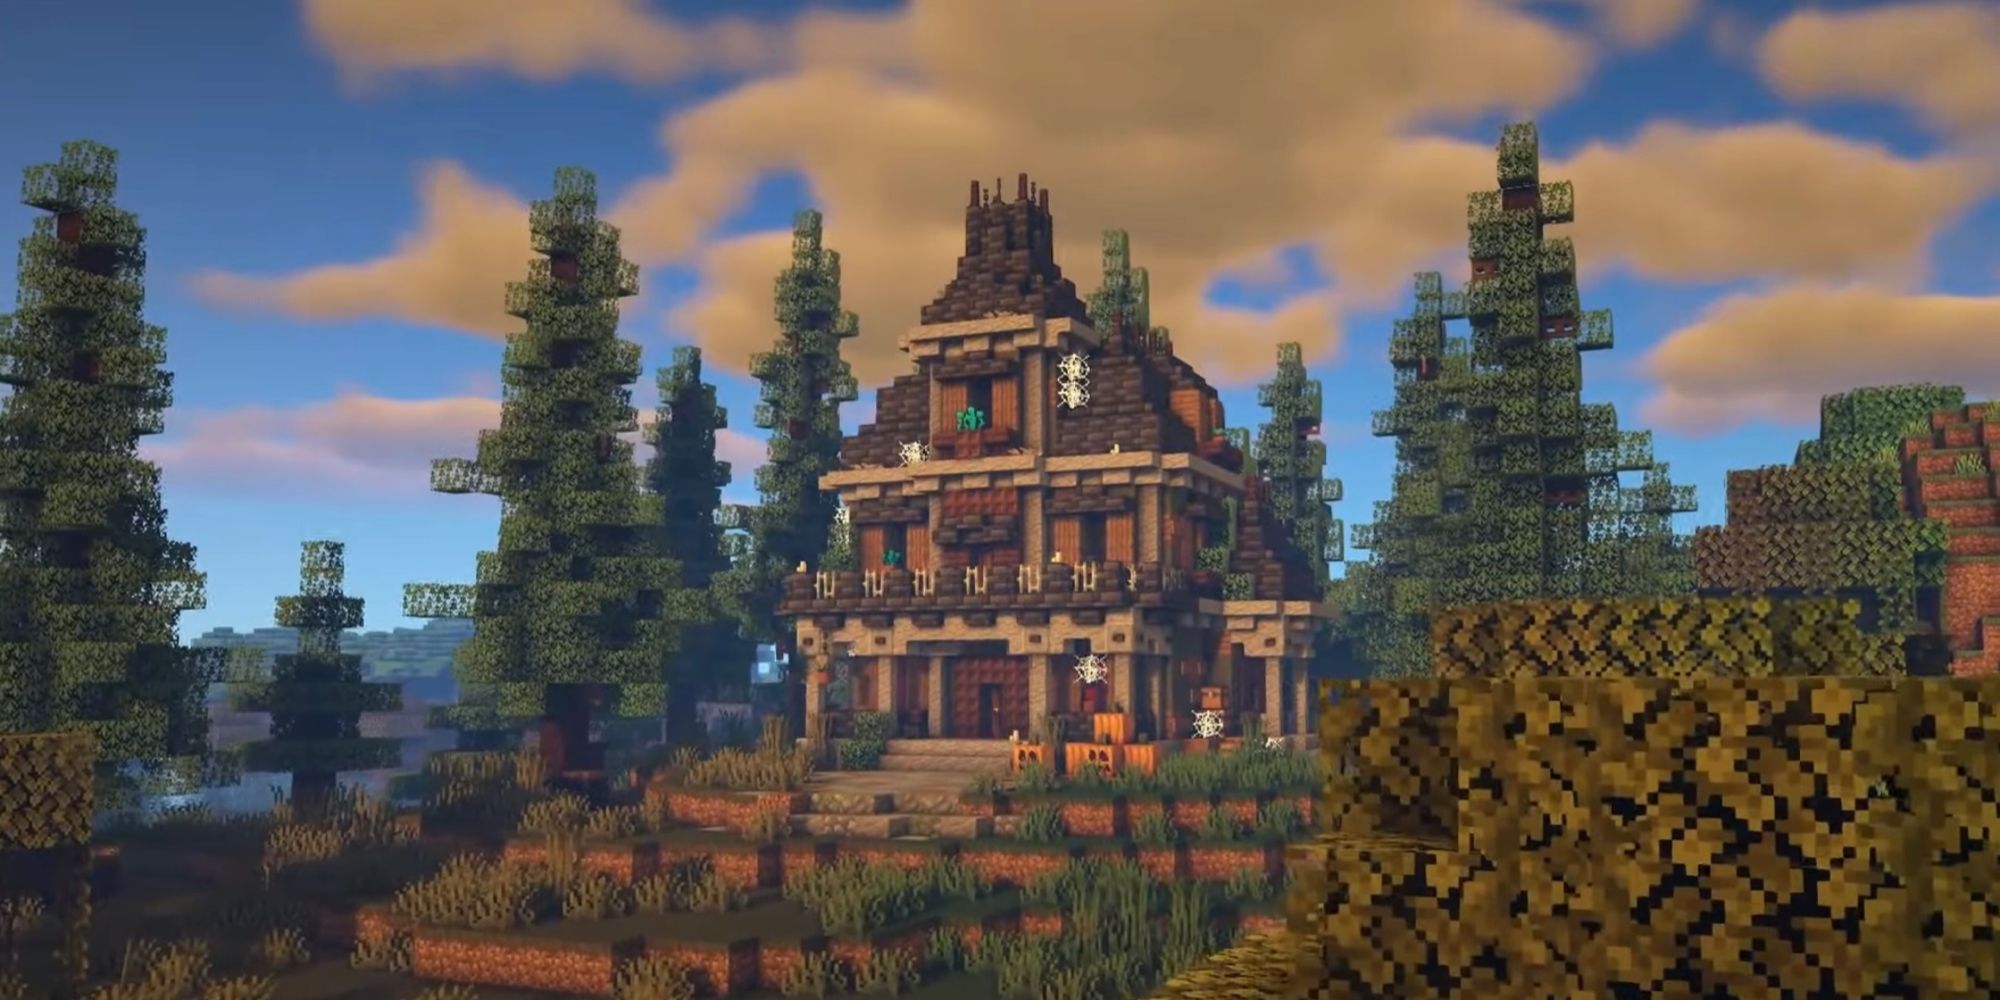 An image from Minecraft of a small haunted house resting on a hill